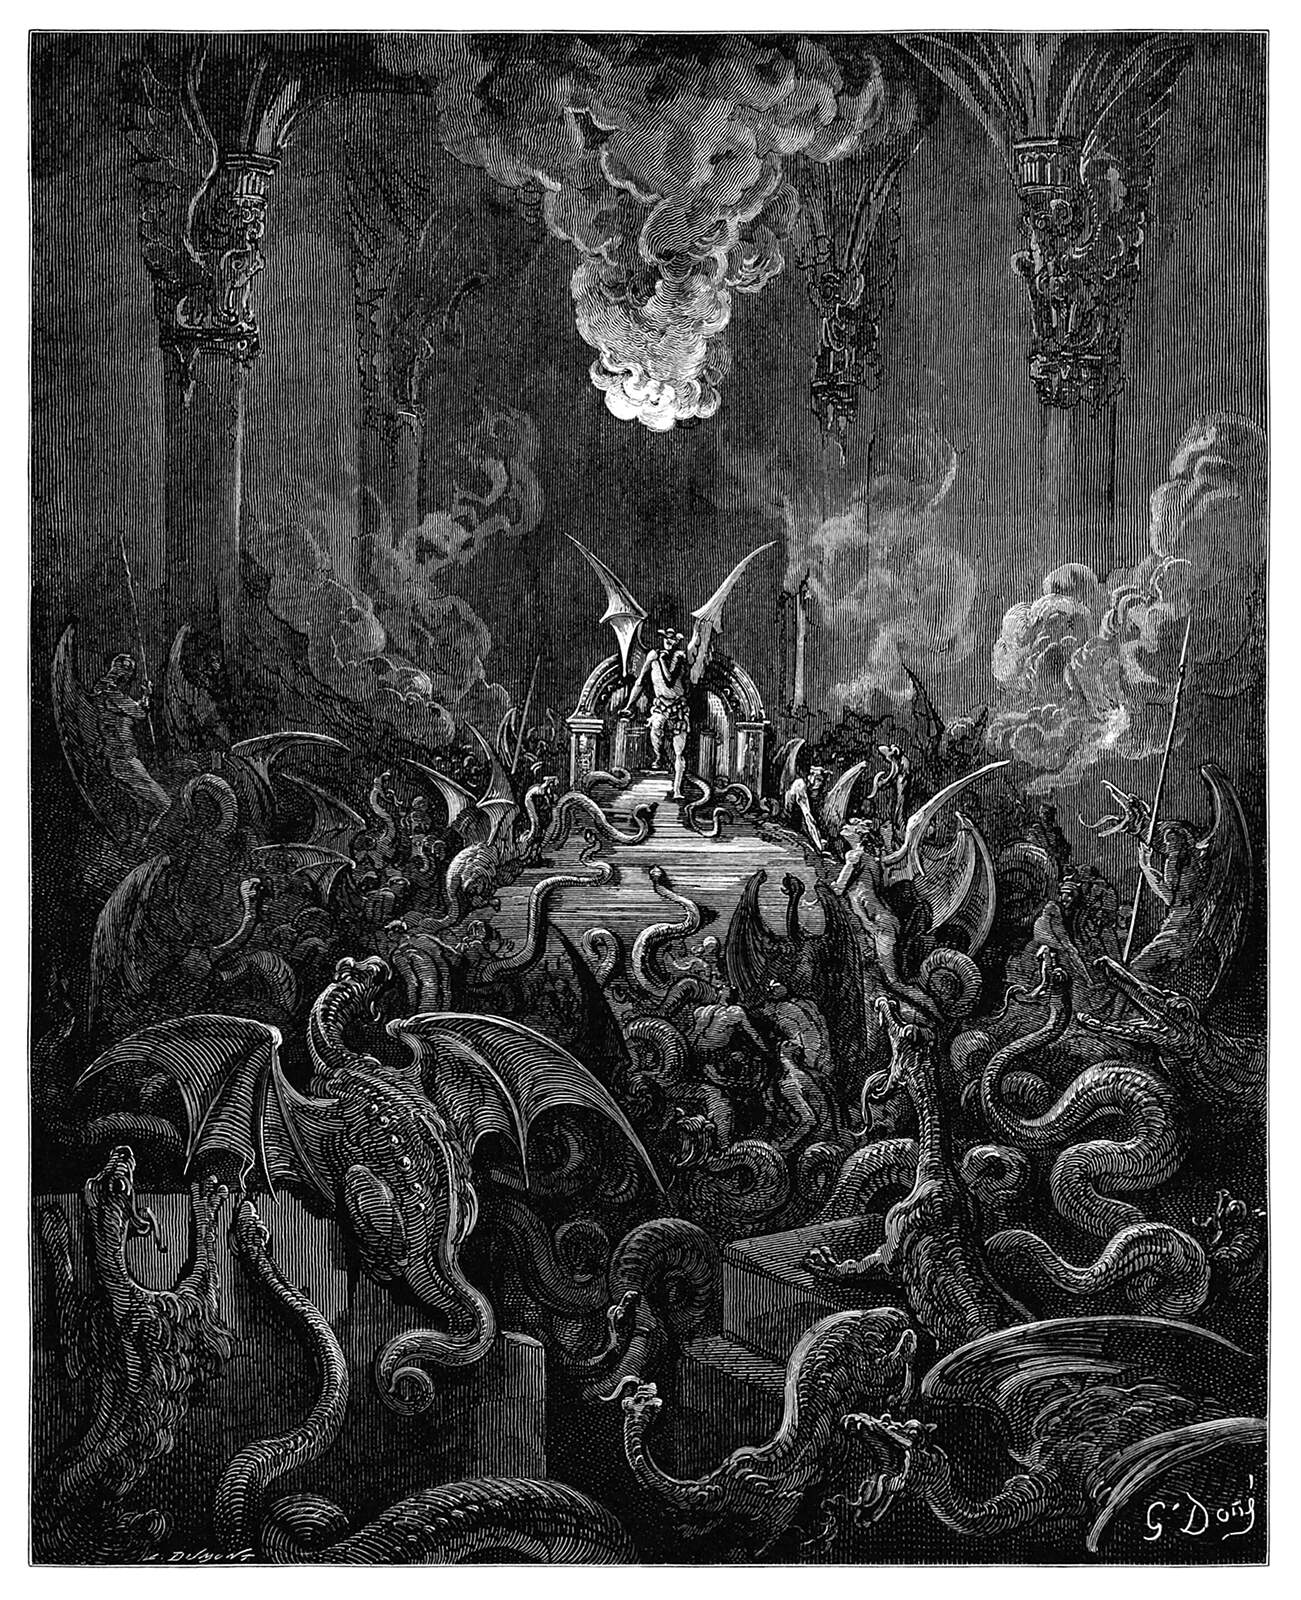 Demons gather in hell